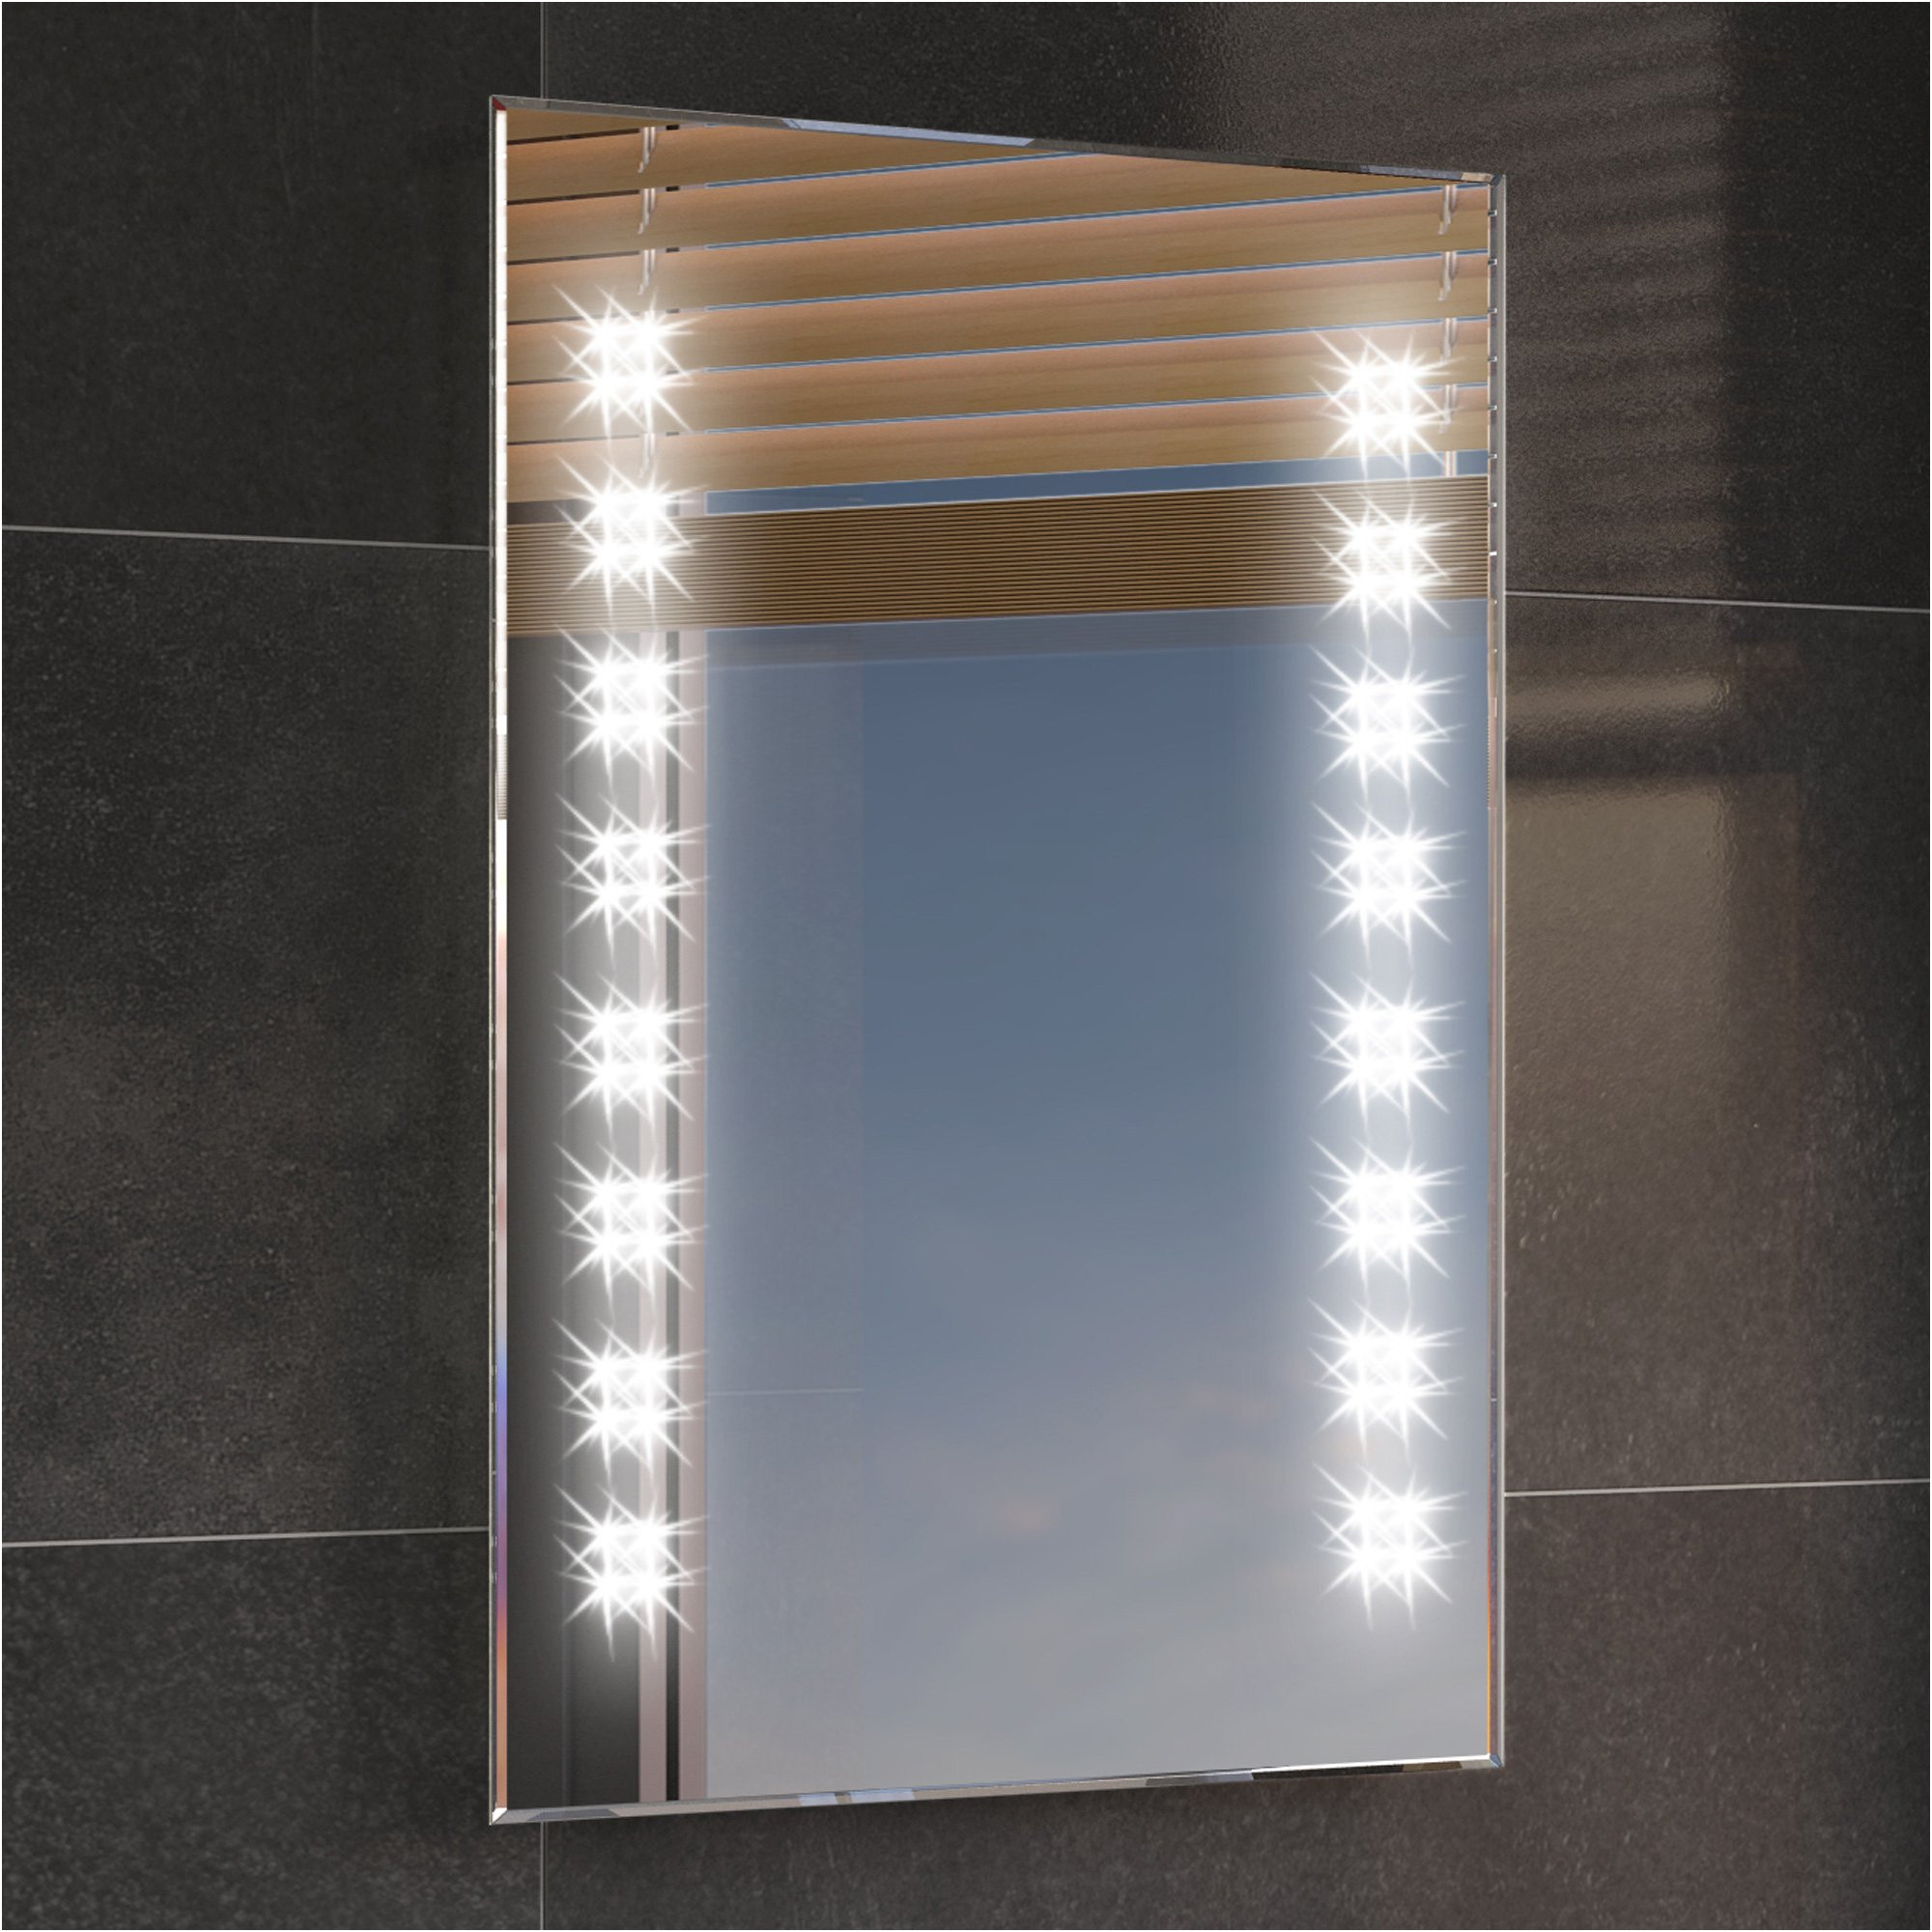 Best Of Over Mirror Bathroom Light with Pull Cord